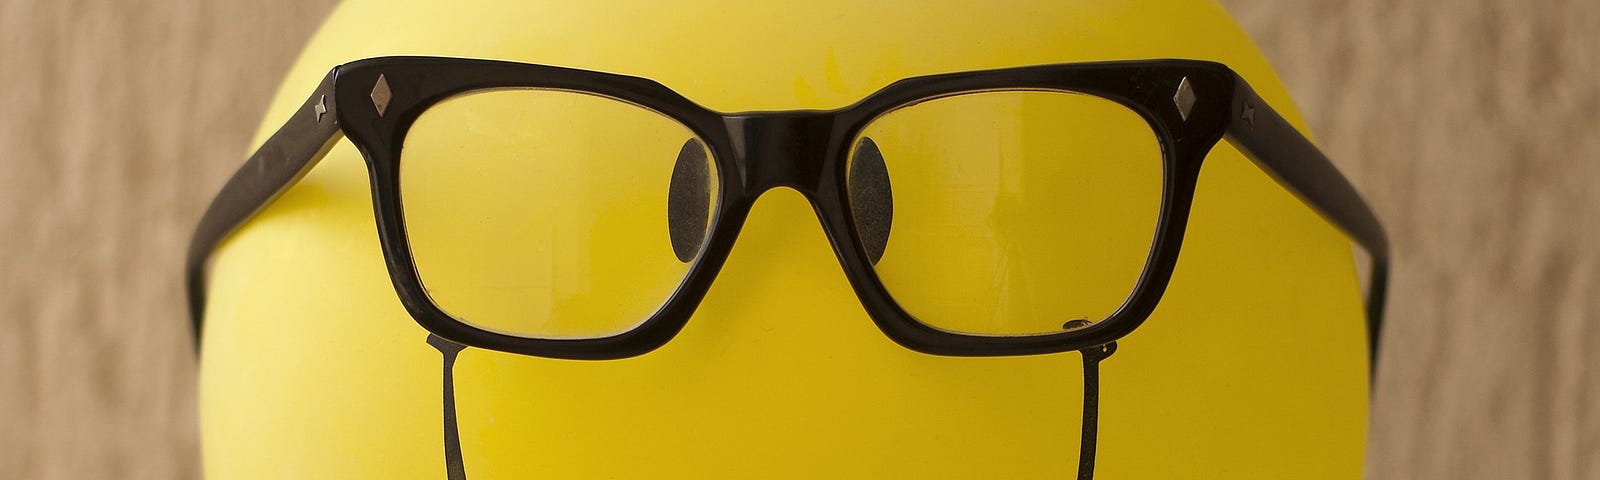 A yellow balloon with eyes and nose drawn on with marker and a pair of real glasses.